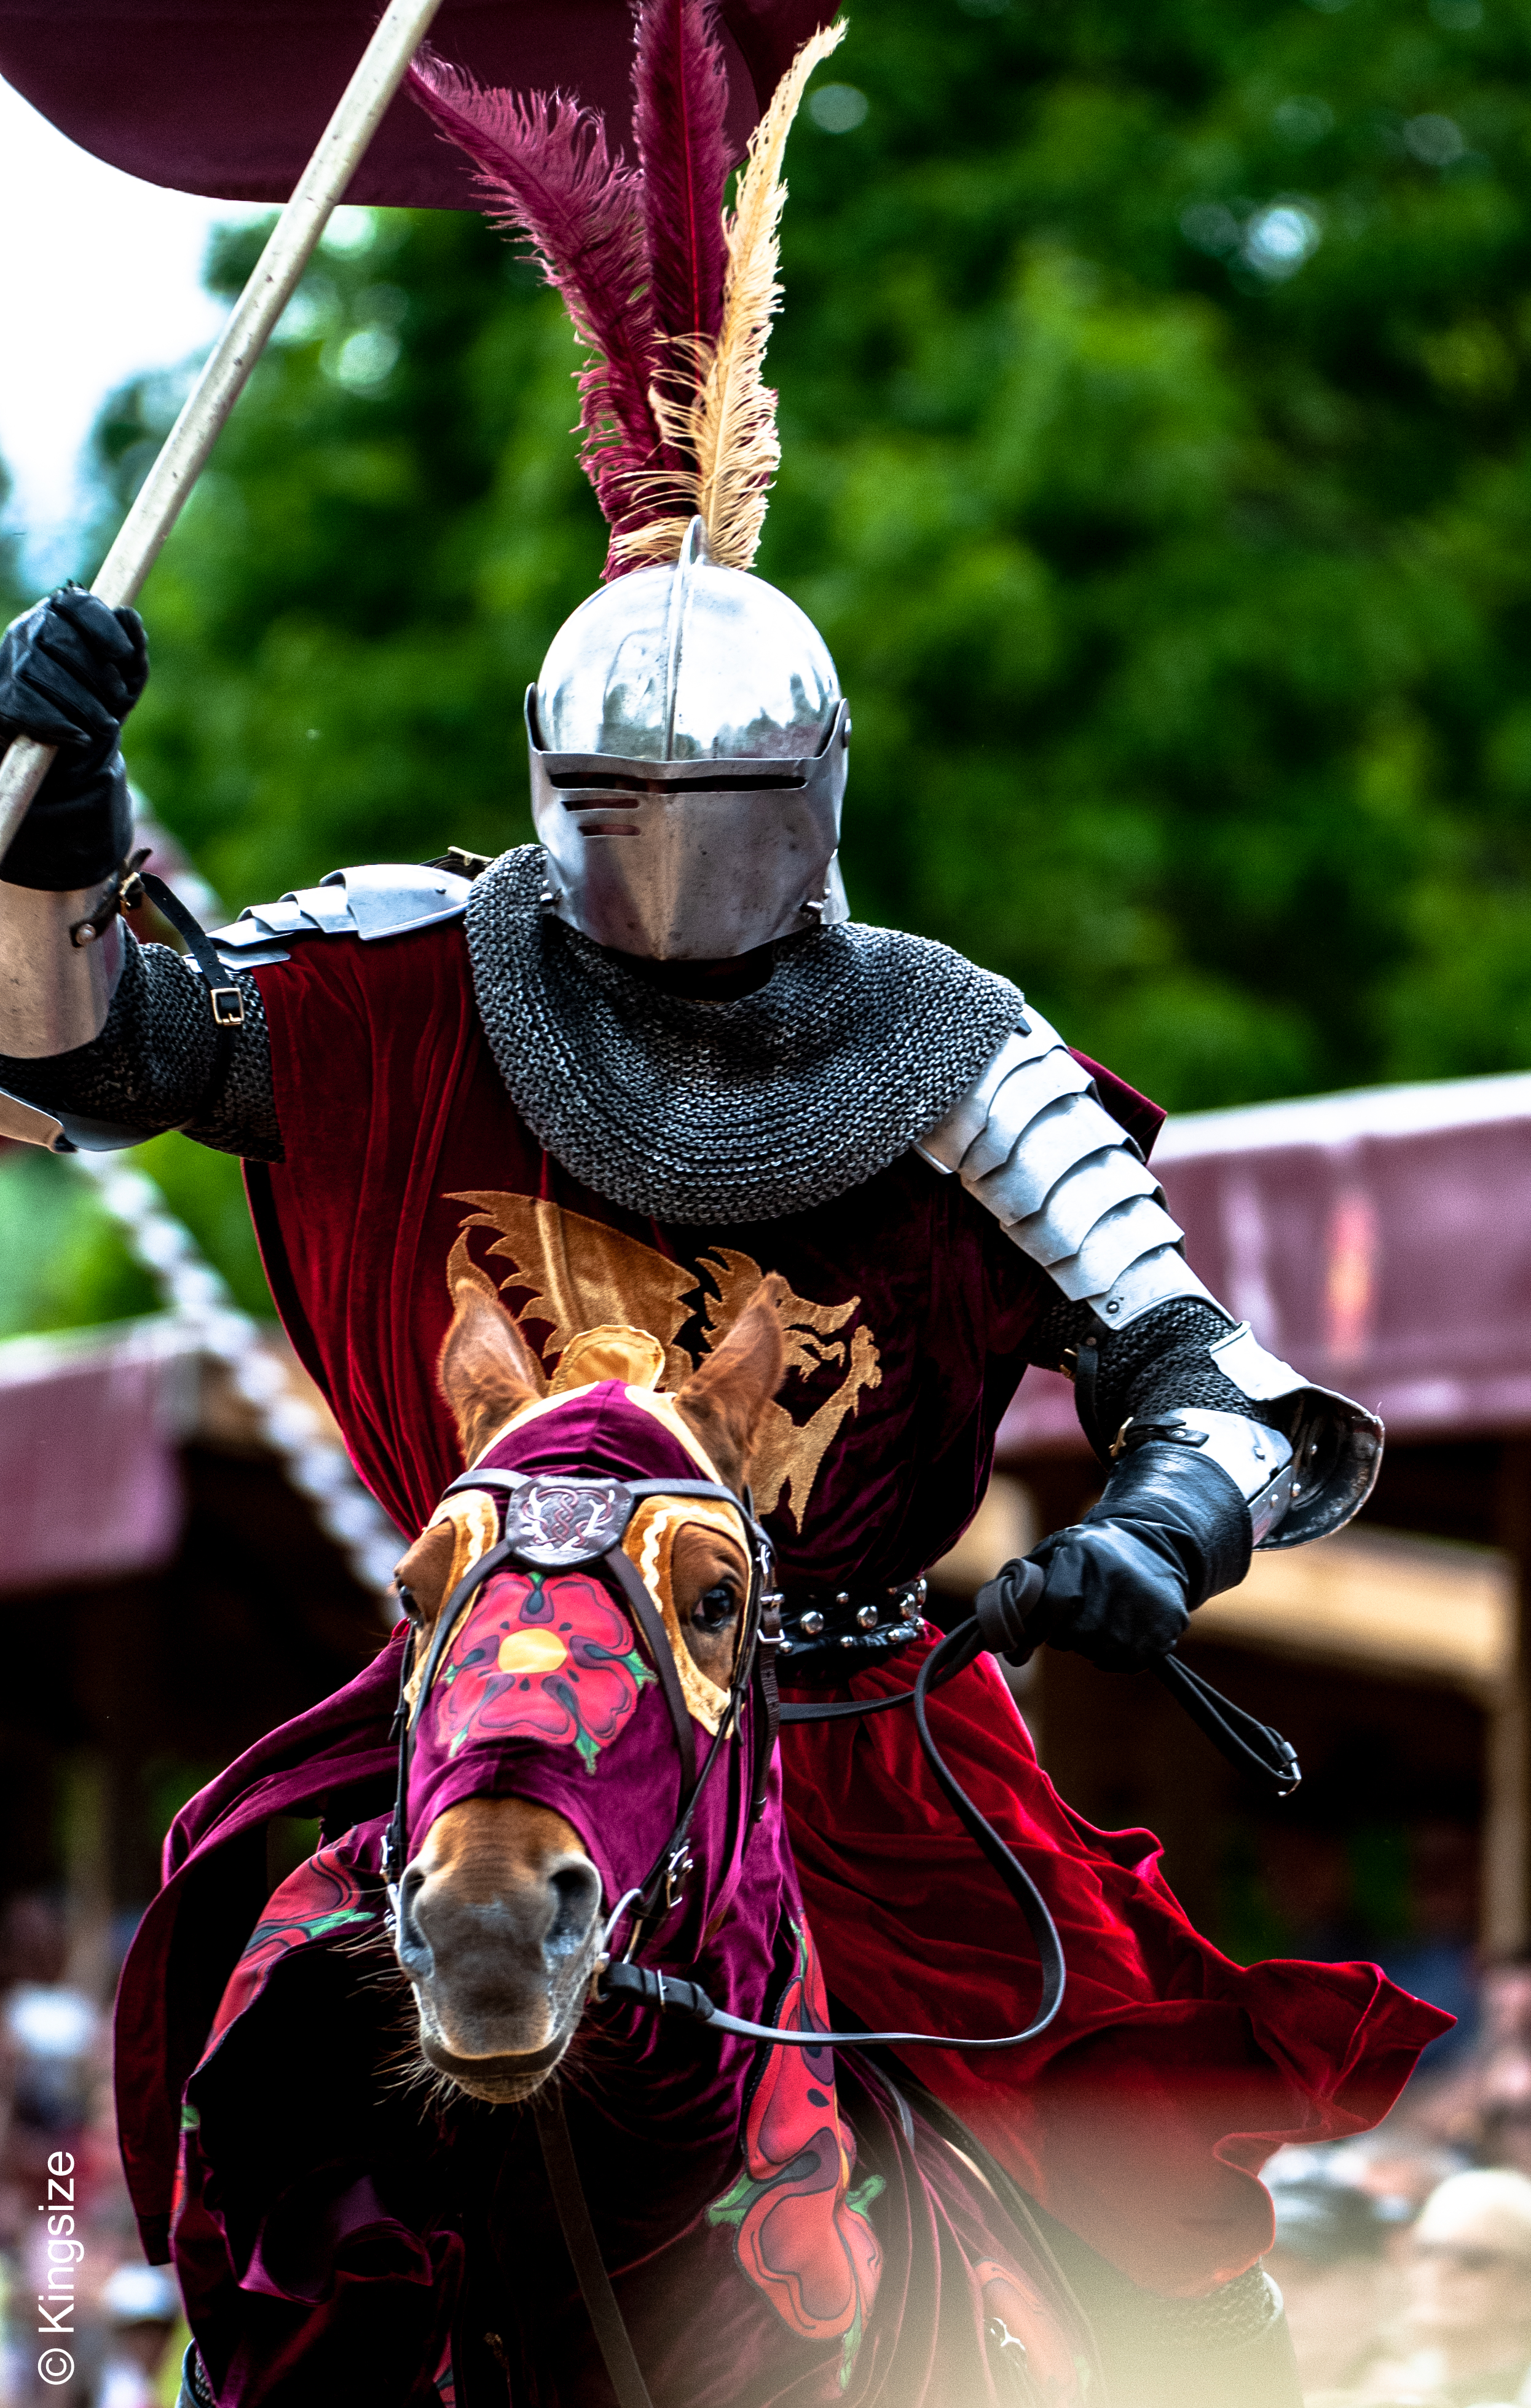 Close-up of Red knight on horse